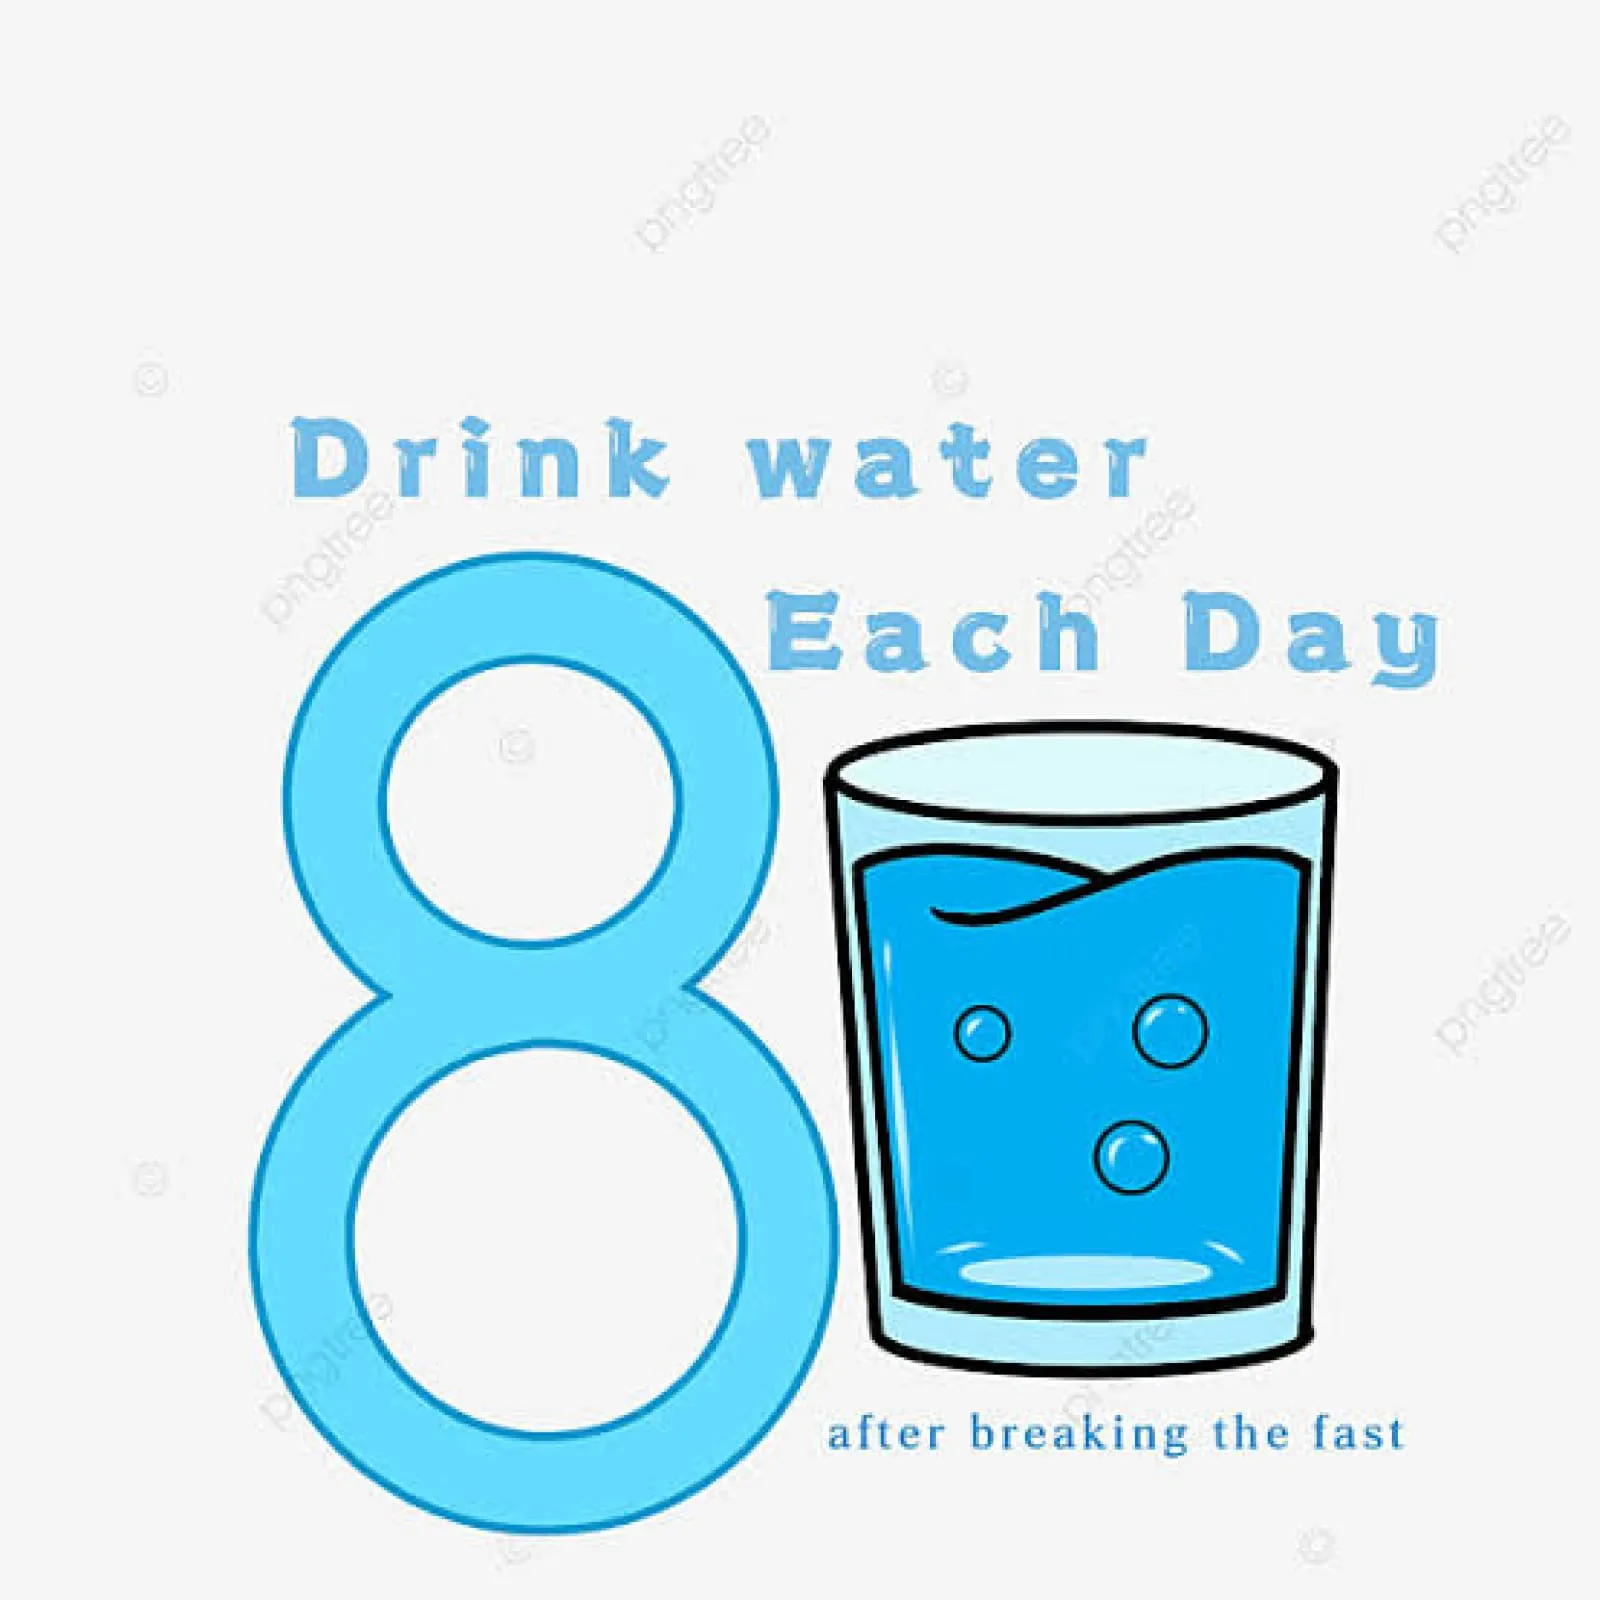 -WHAT! Eight Glasses Of Water A Day May Be Too Much, Scientists Warn!